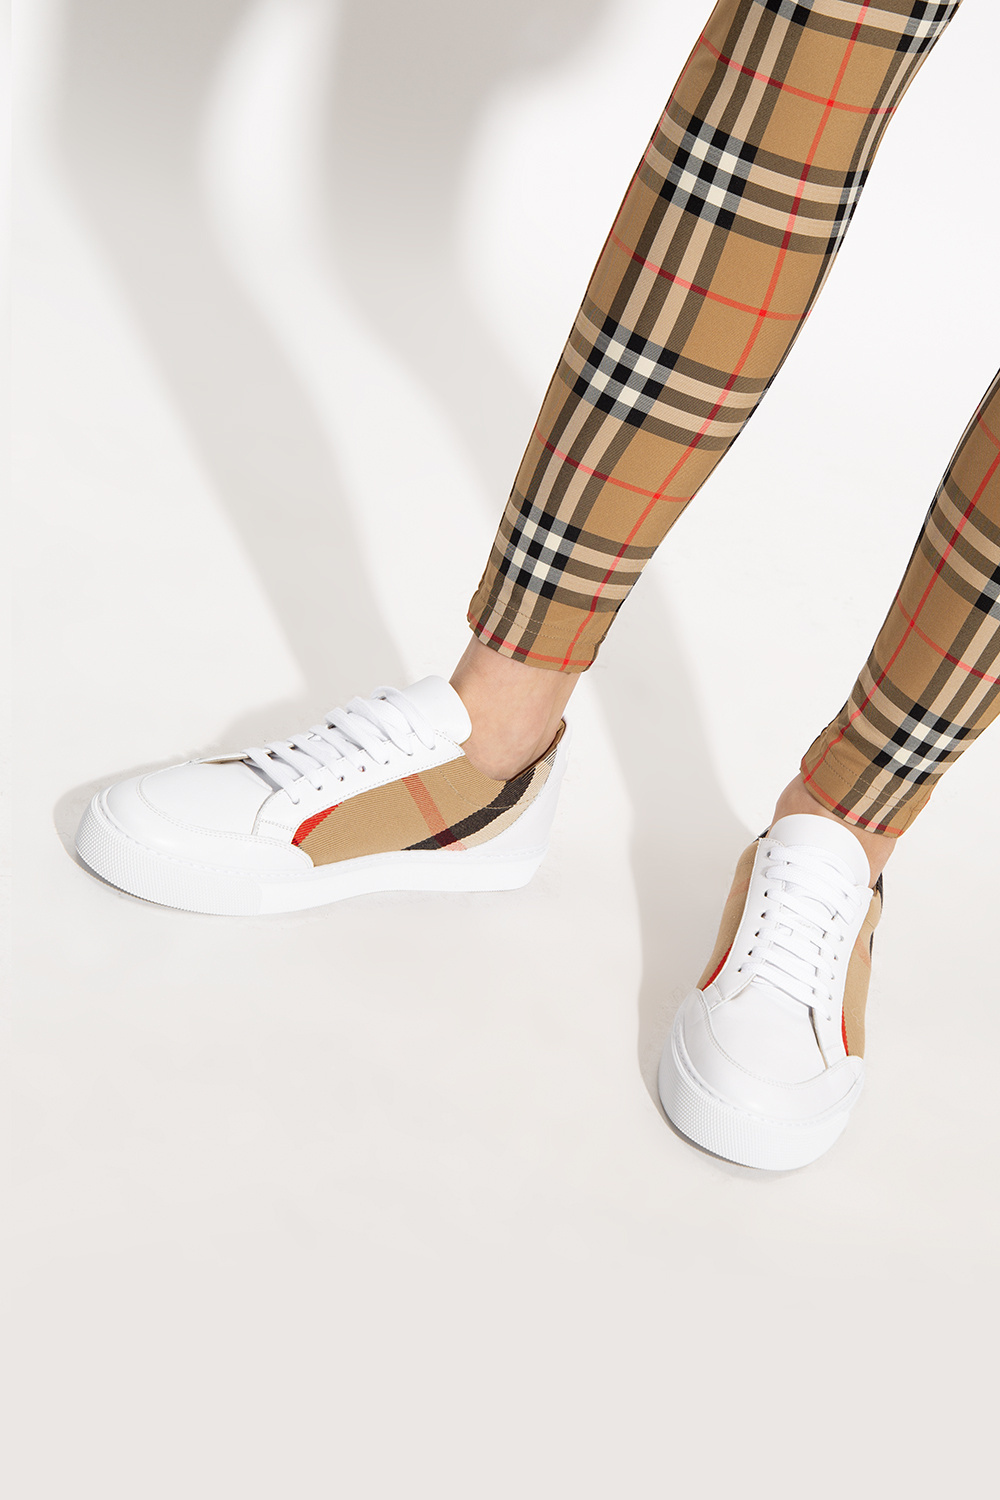 burberry This ‘New Salmond’ sneakers